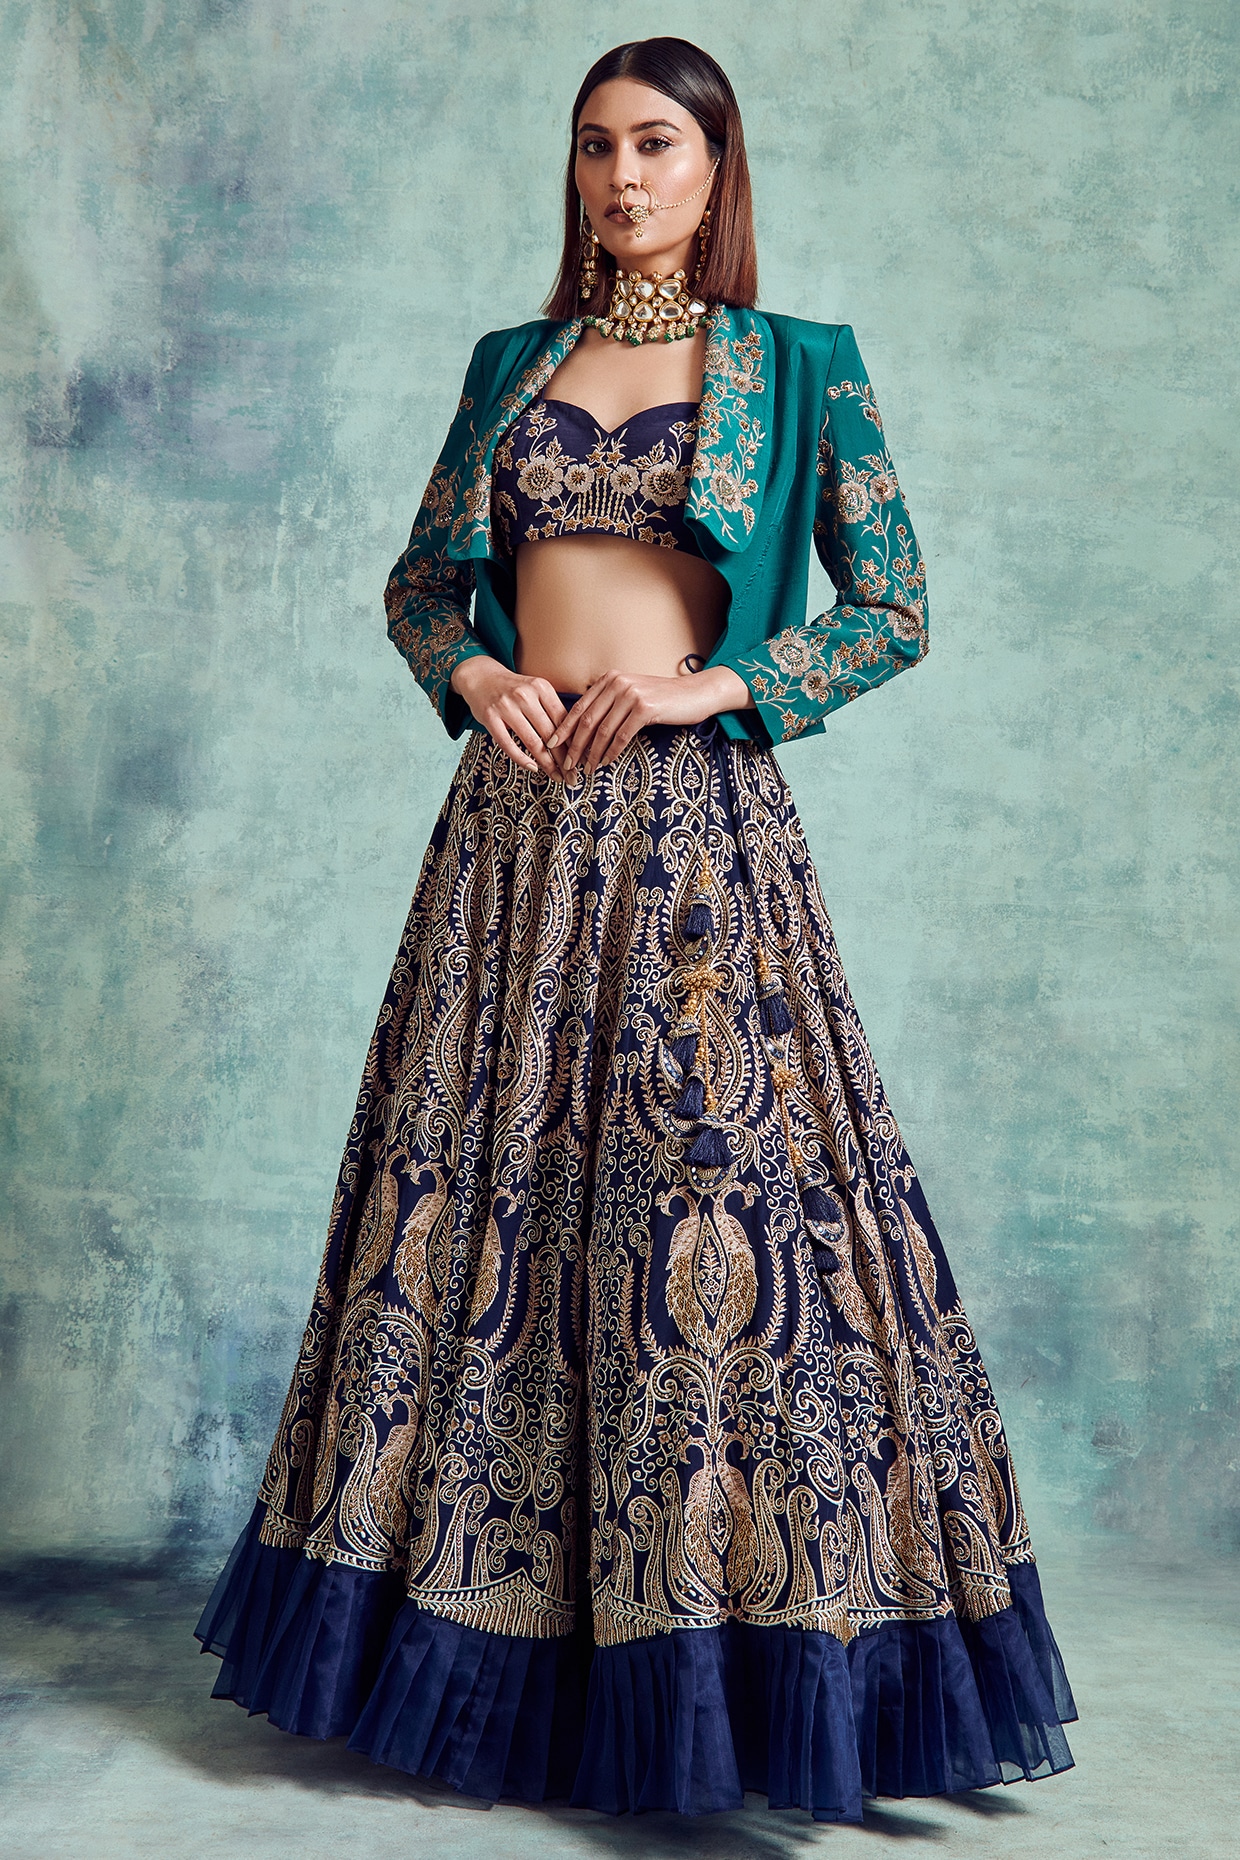 Latest Sabyasachi Collection For Bride & Grooms - Decoded!